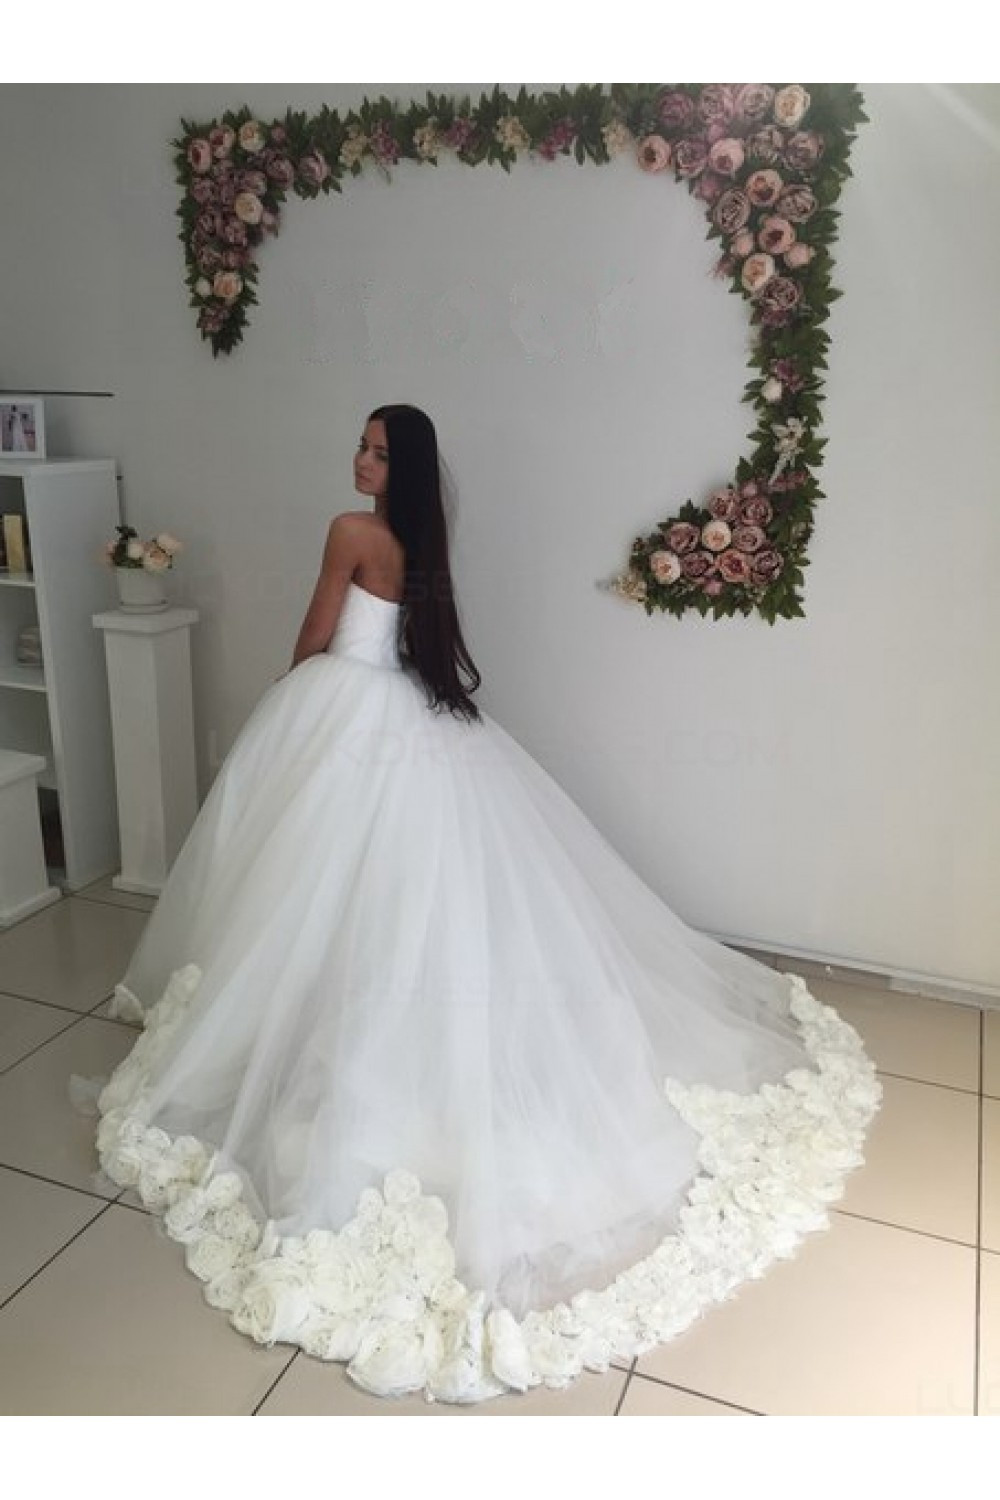 Sweetheart Wedding Gown
 Ball Gown Sweetheart Wedding Dresses Bridal Gowns